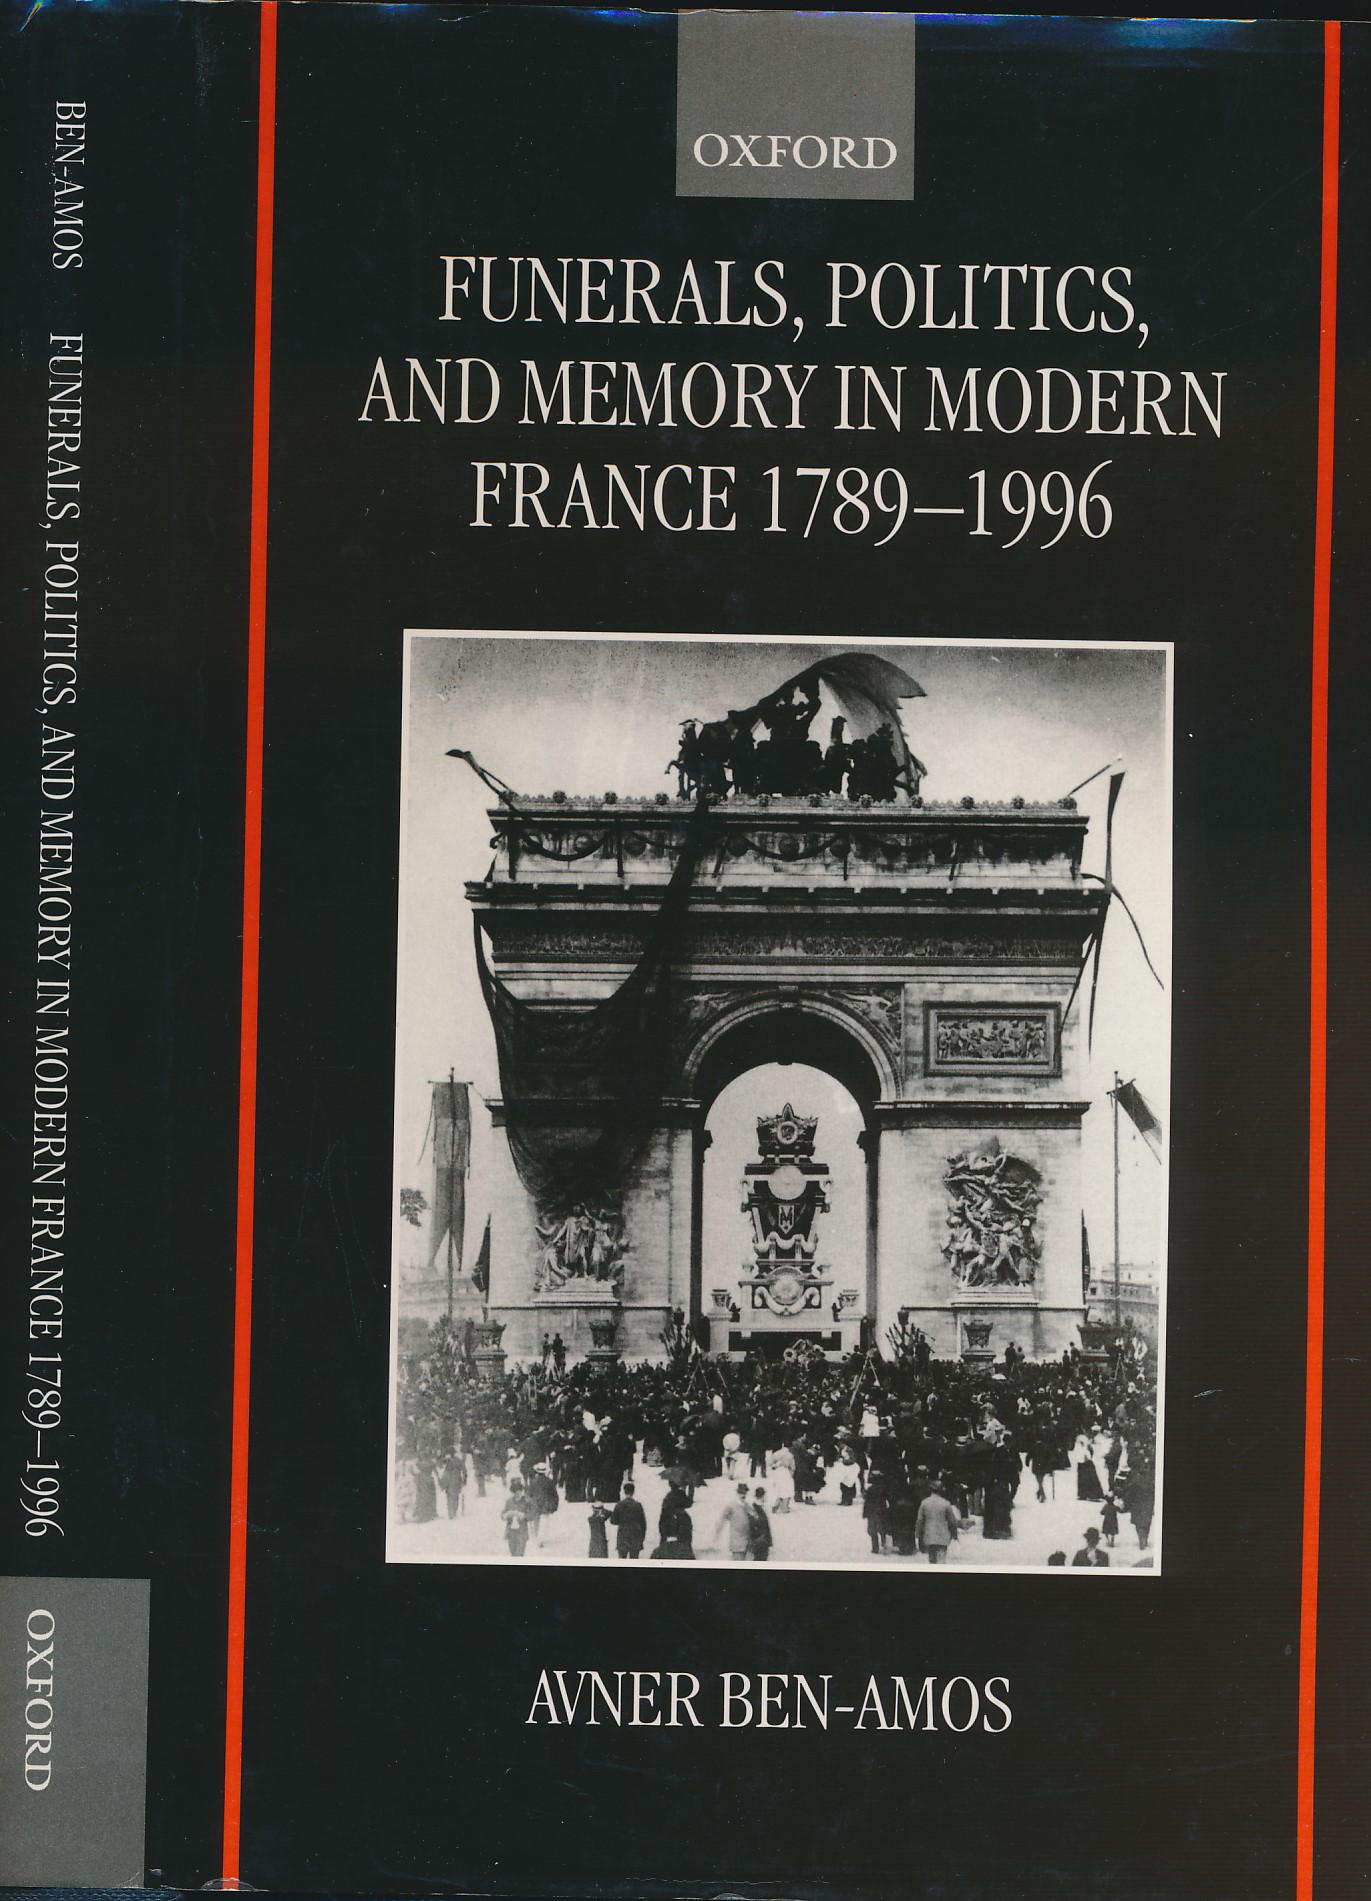 Funerals, Politics and Memory in Modern France 1789-1996